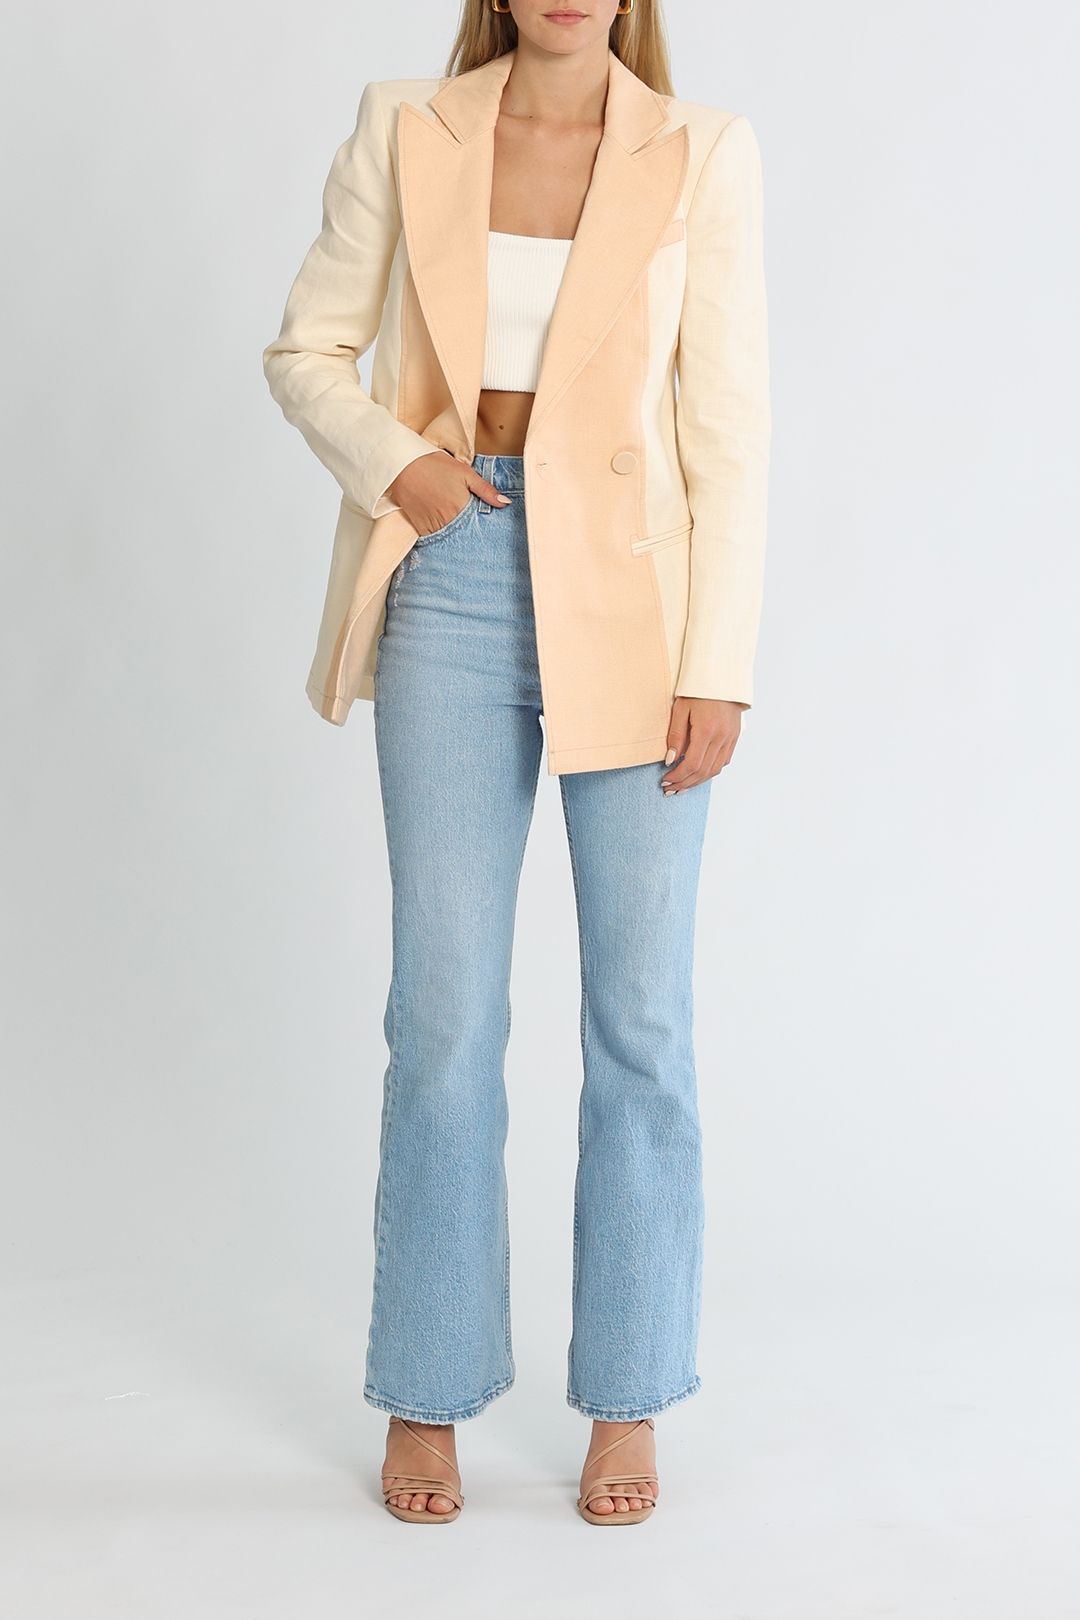 Significant Other Gilder Blazer Peach With Cream